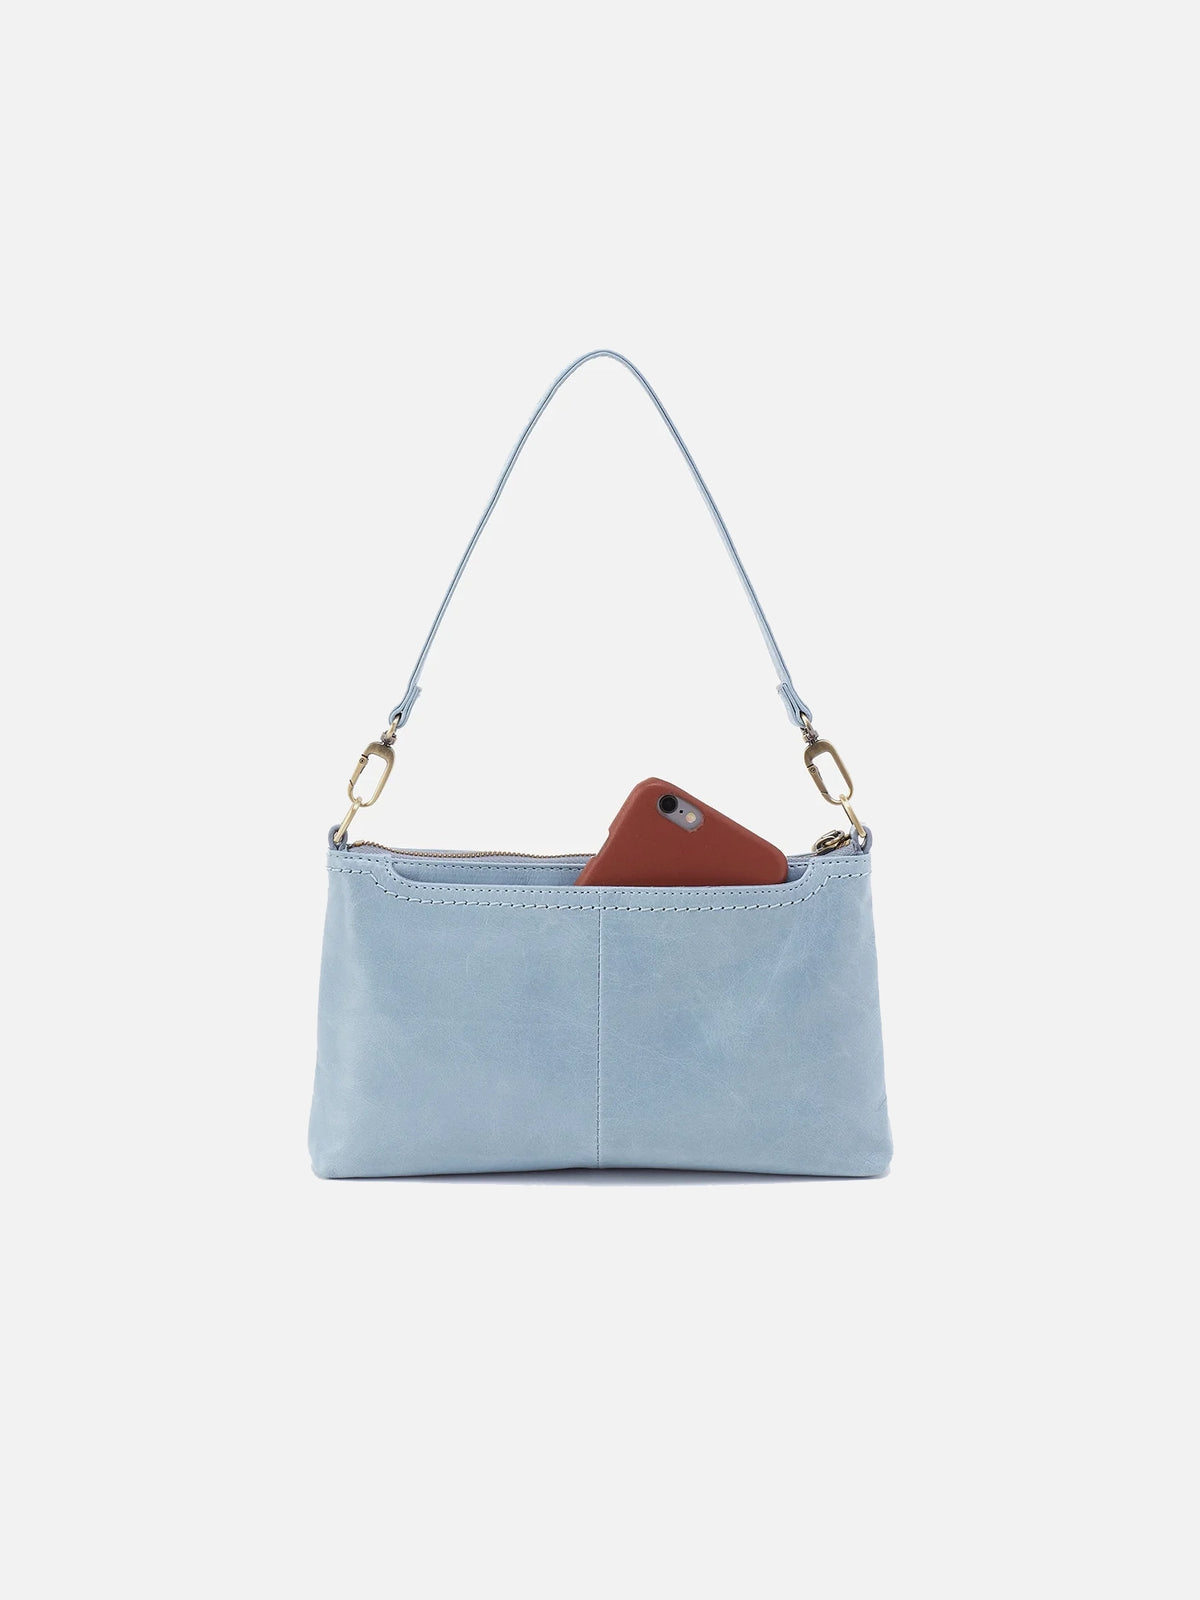 hobo darcy convertible 3-way crossbody bag in light blue cornflower polished leather